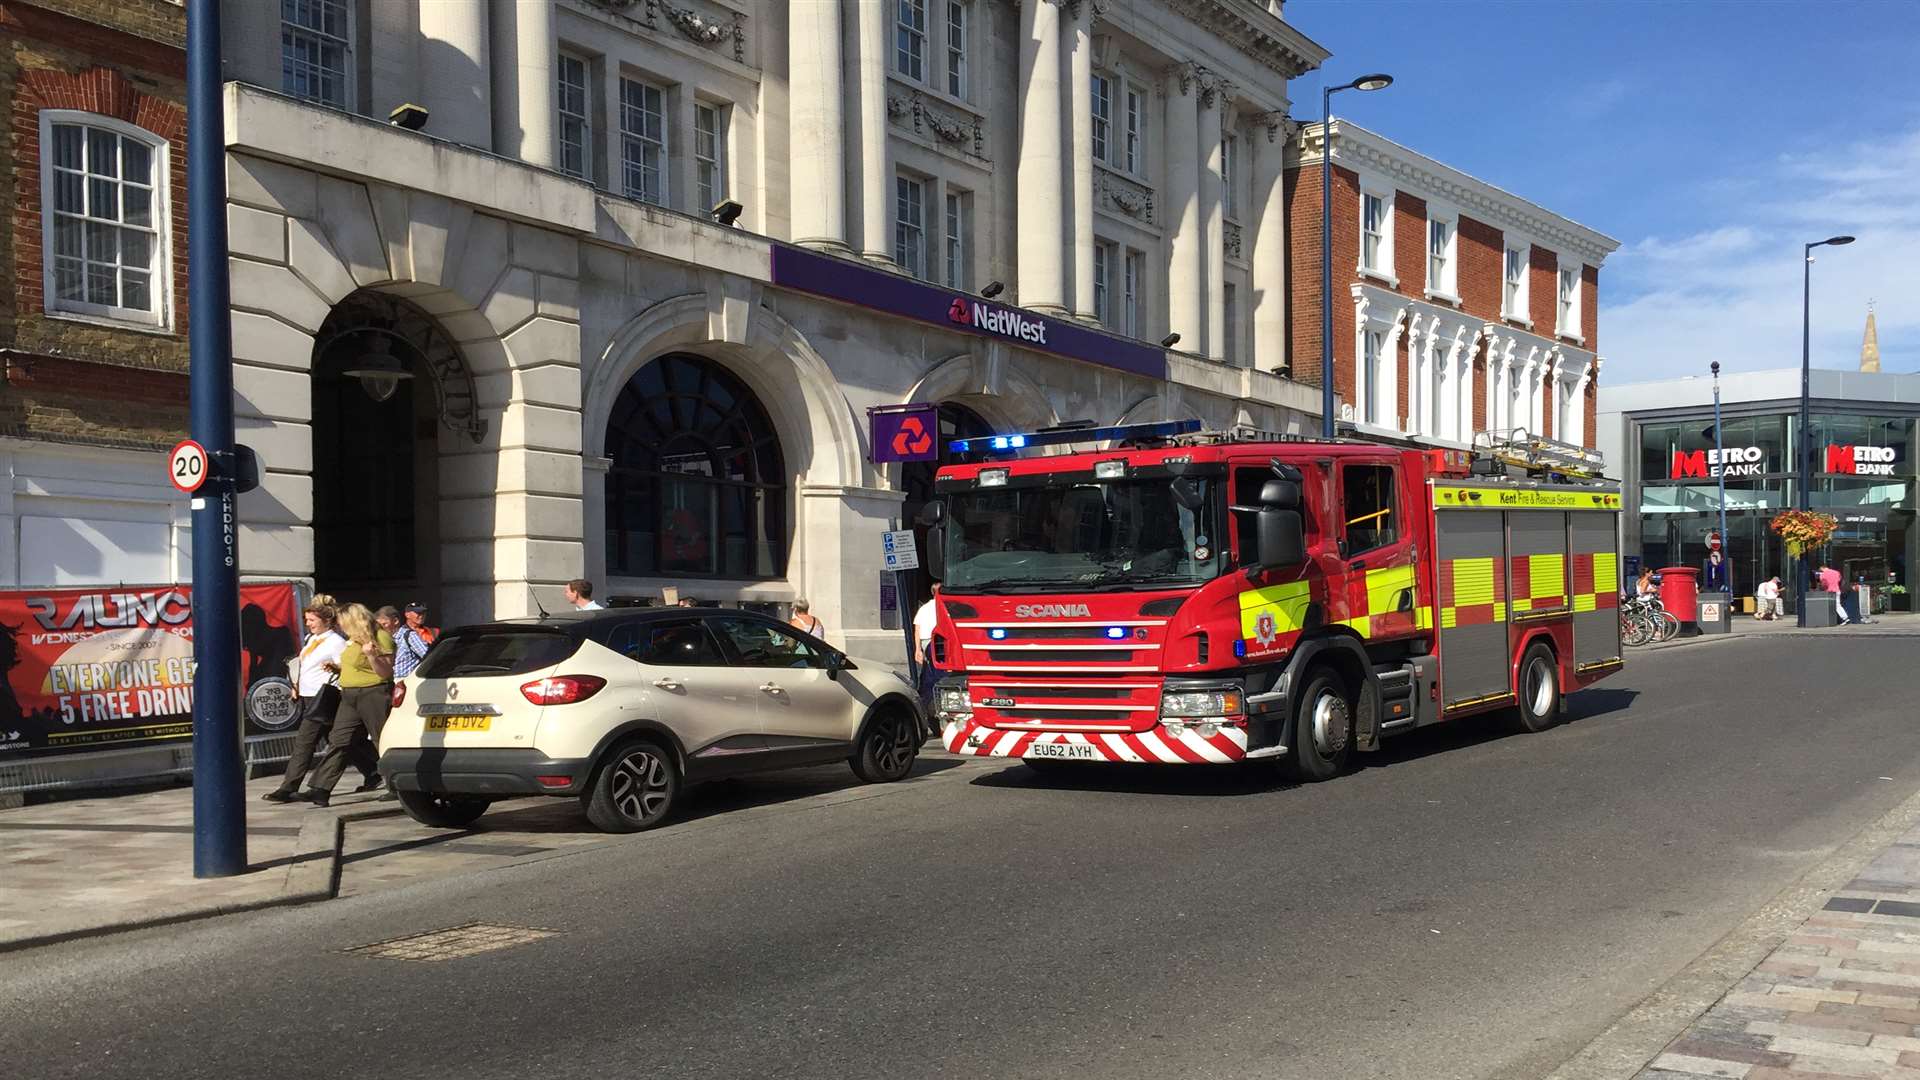 Emergency services descended on High Street, Maidstone this afternoon